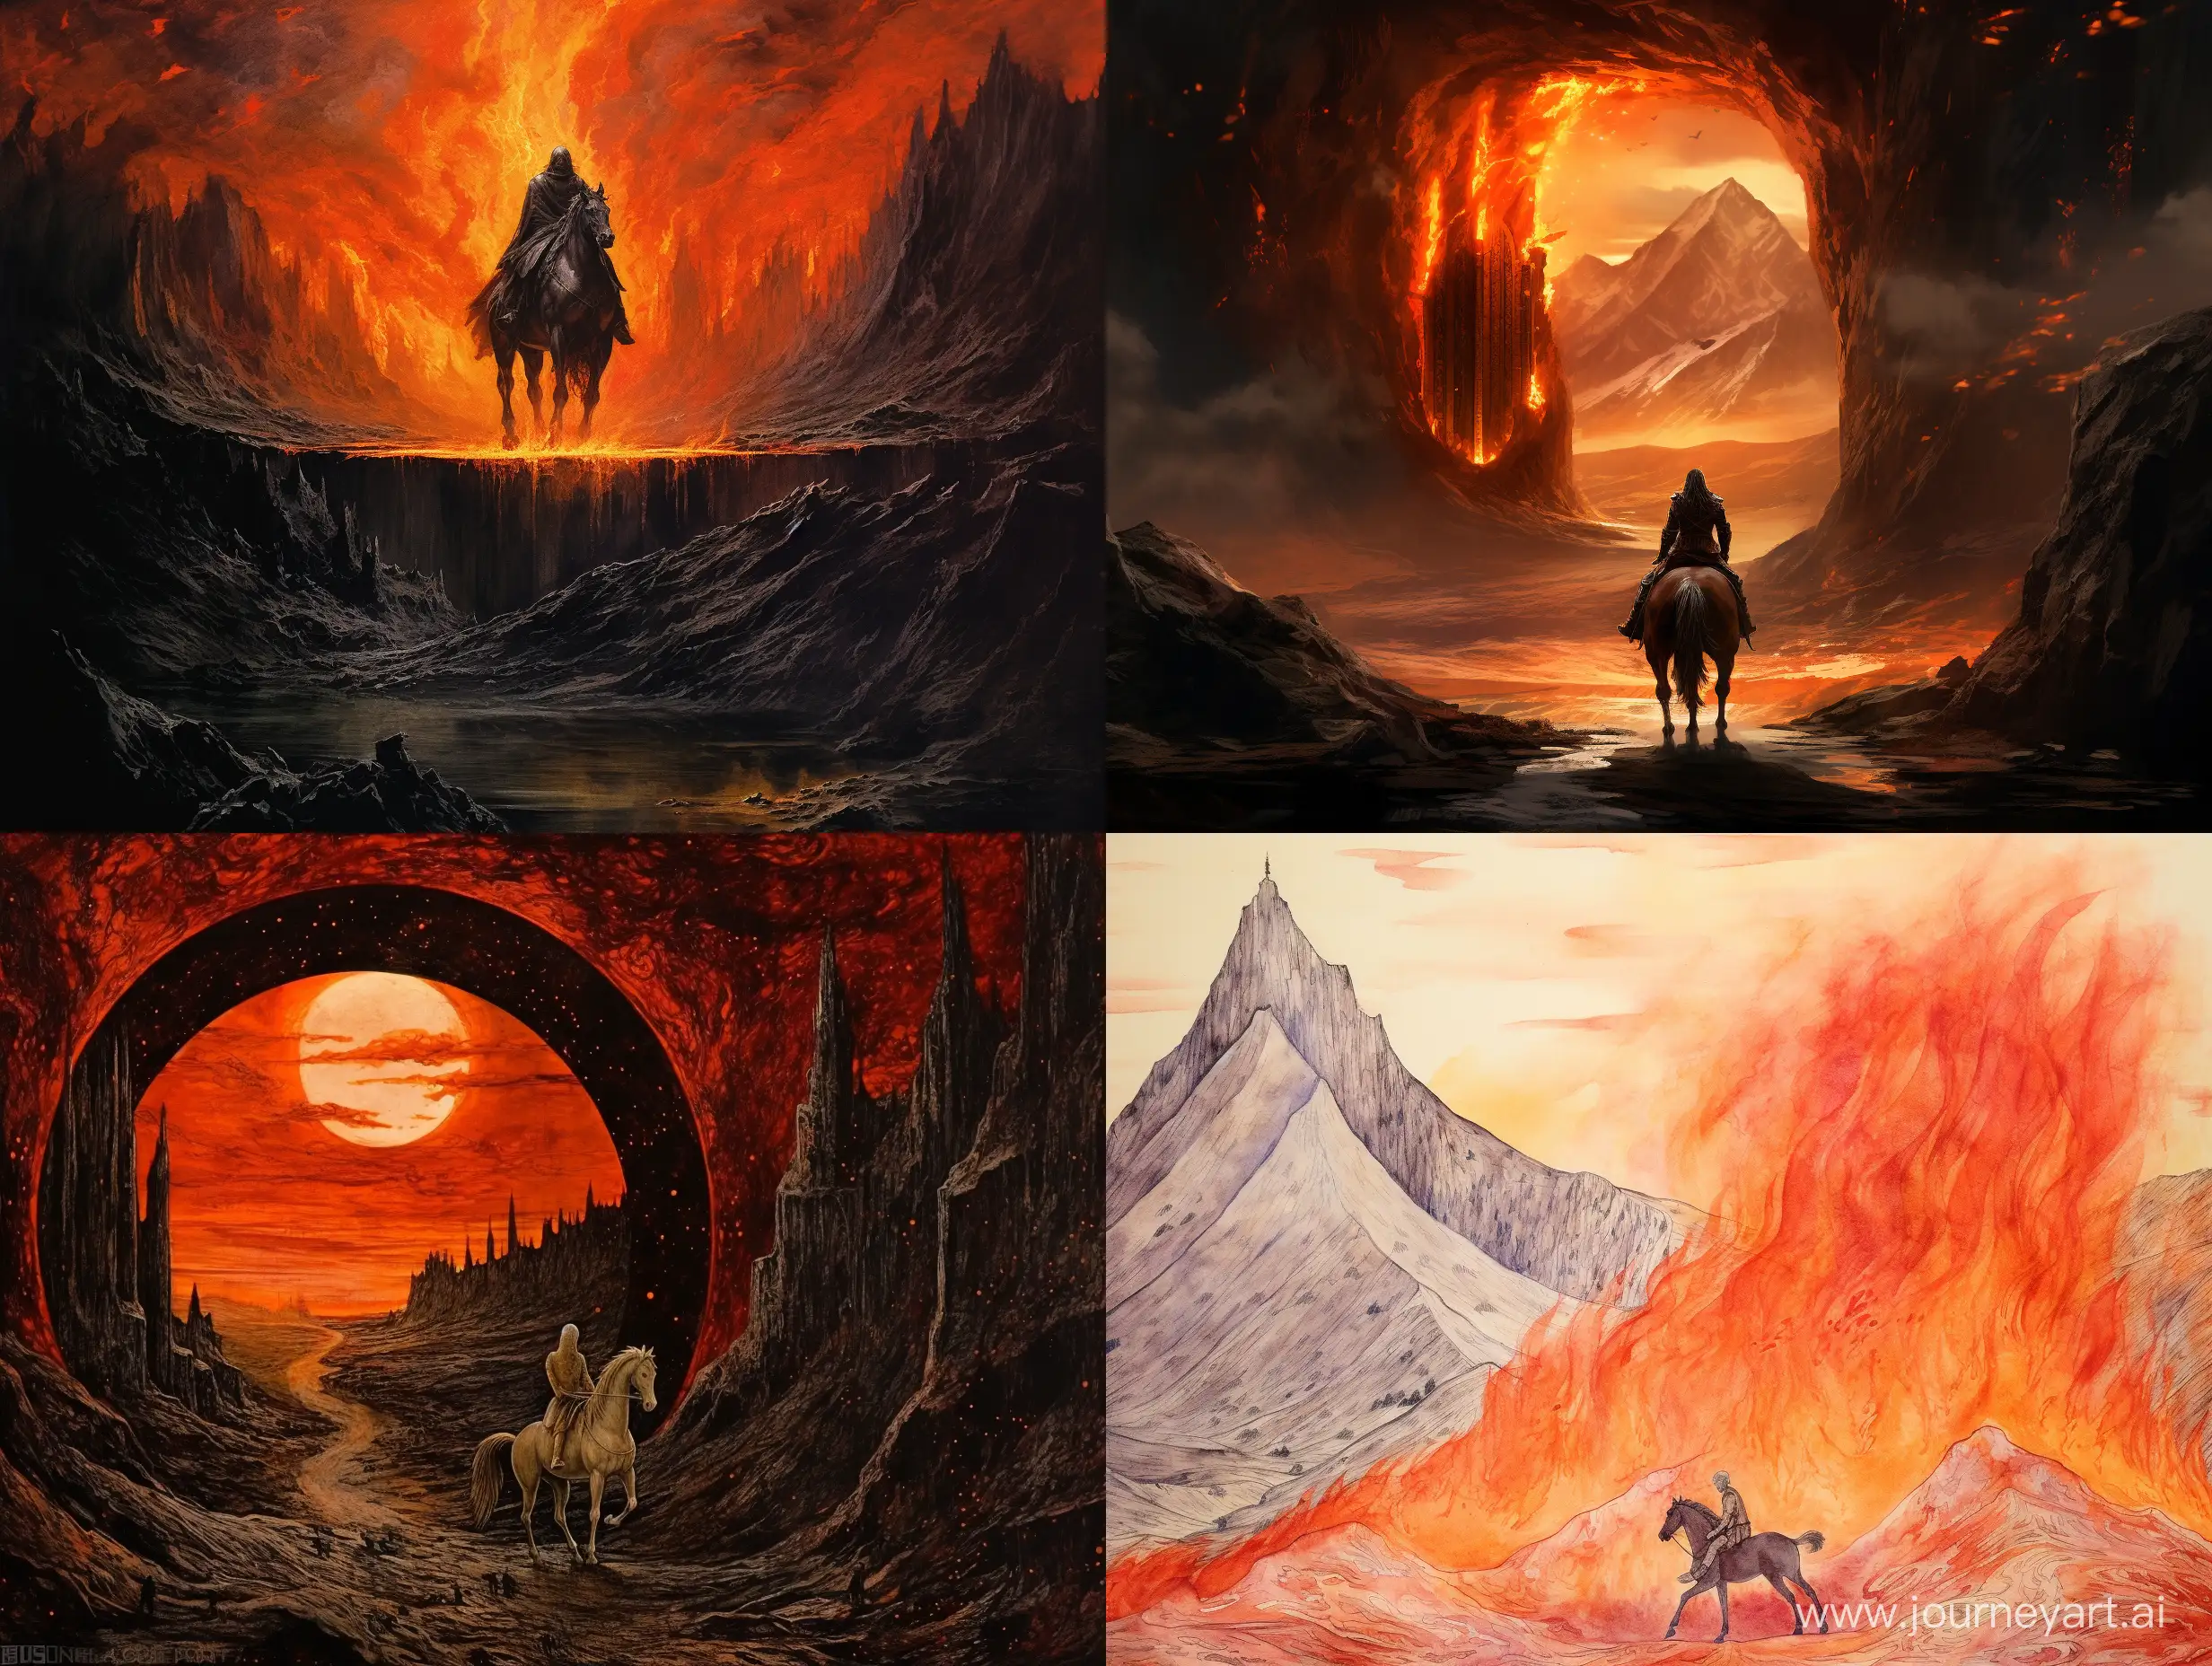 Sigurd-Contemplating-the-Fiery-Portal-atop-the-Mountain-with-his-Horse